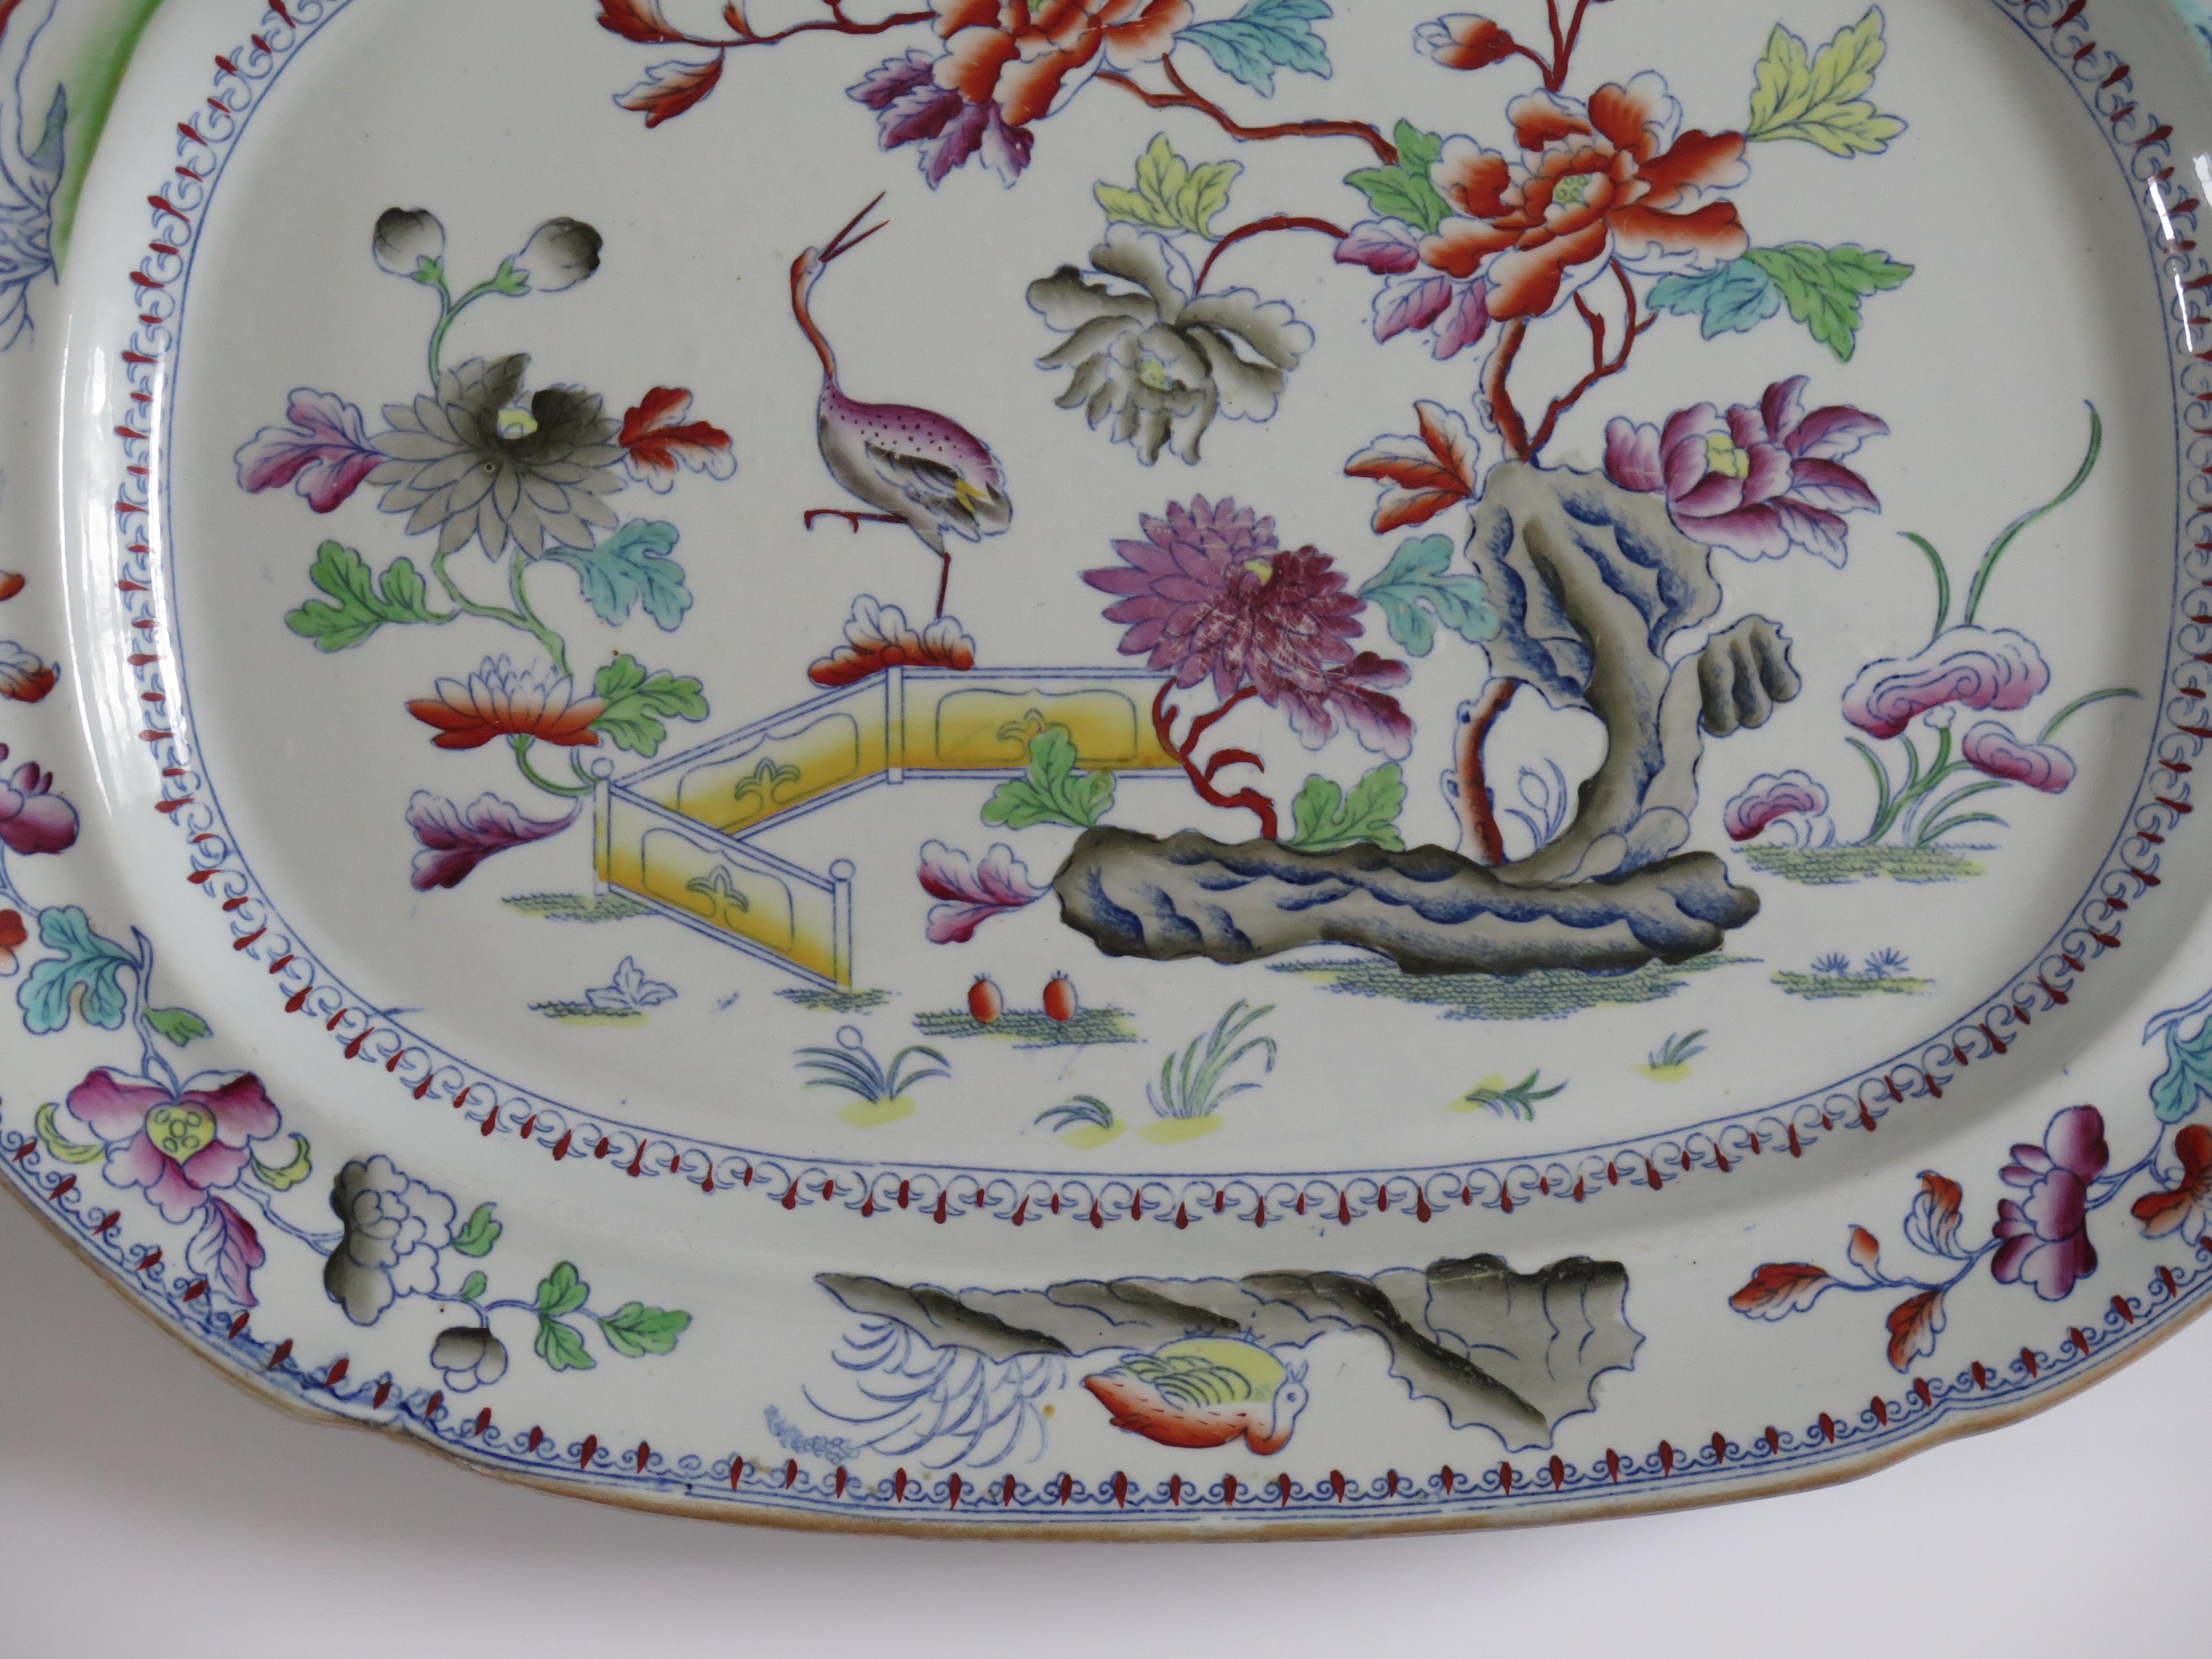 This is a finely hand painted large and rare early Stone China (Ironstone) Meat Plate or Platter, which dates to the George 111 period, circa 1815. Made by the DAVENPORT factory of Longport, Staffordshire Potteries, England.

The platter is very